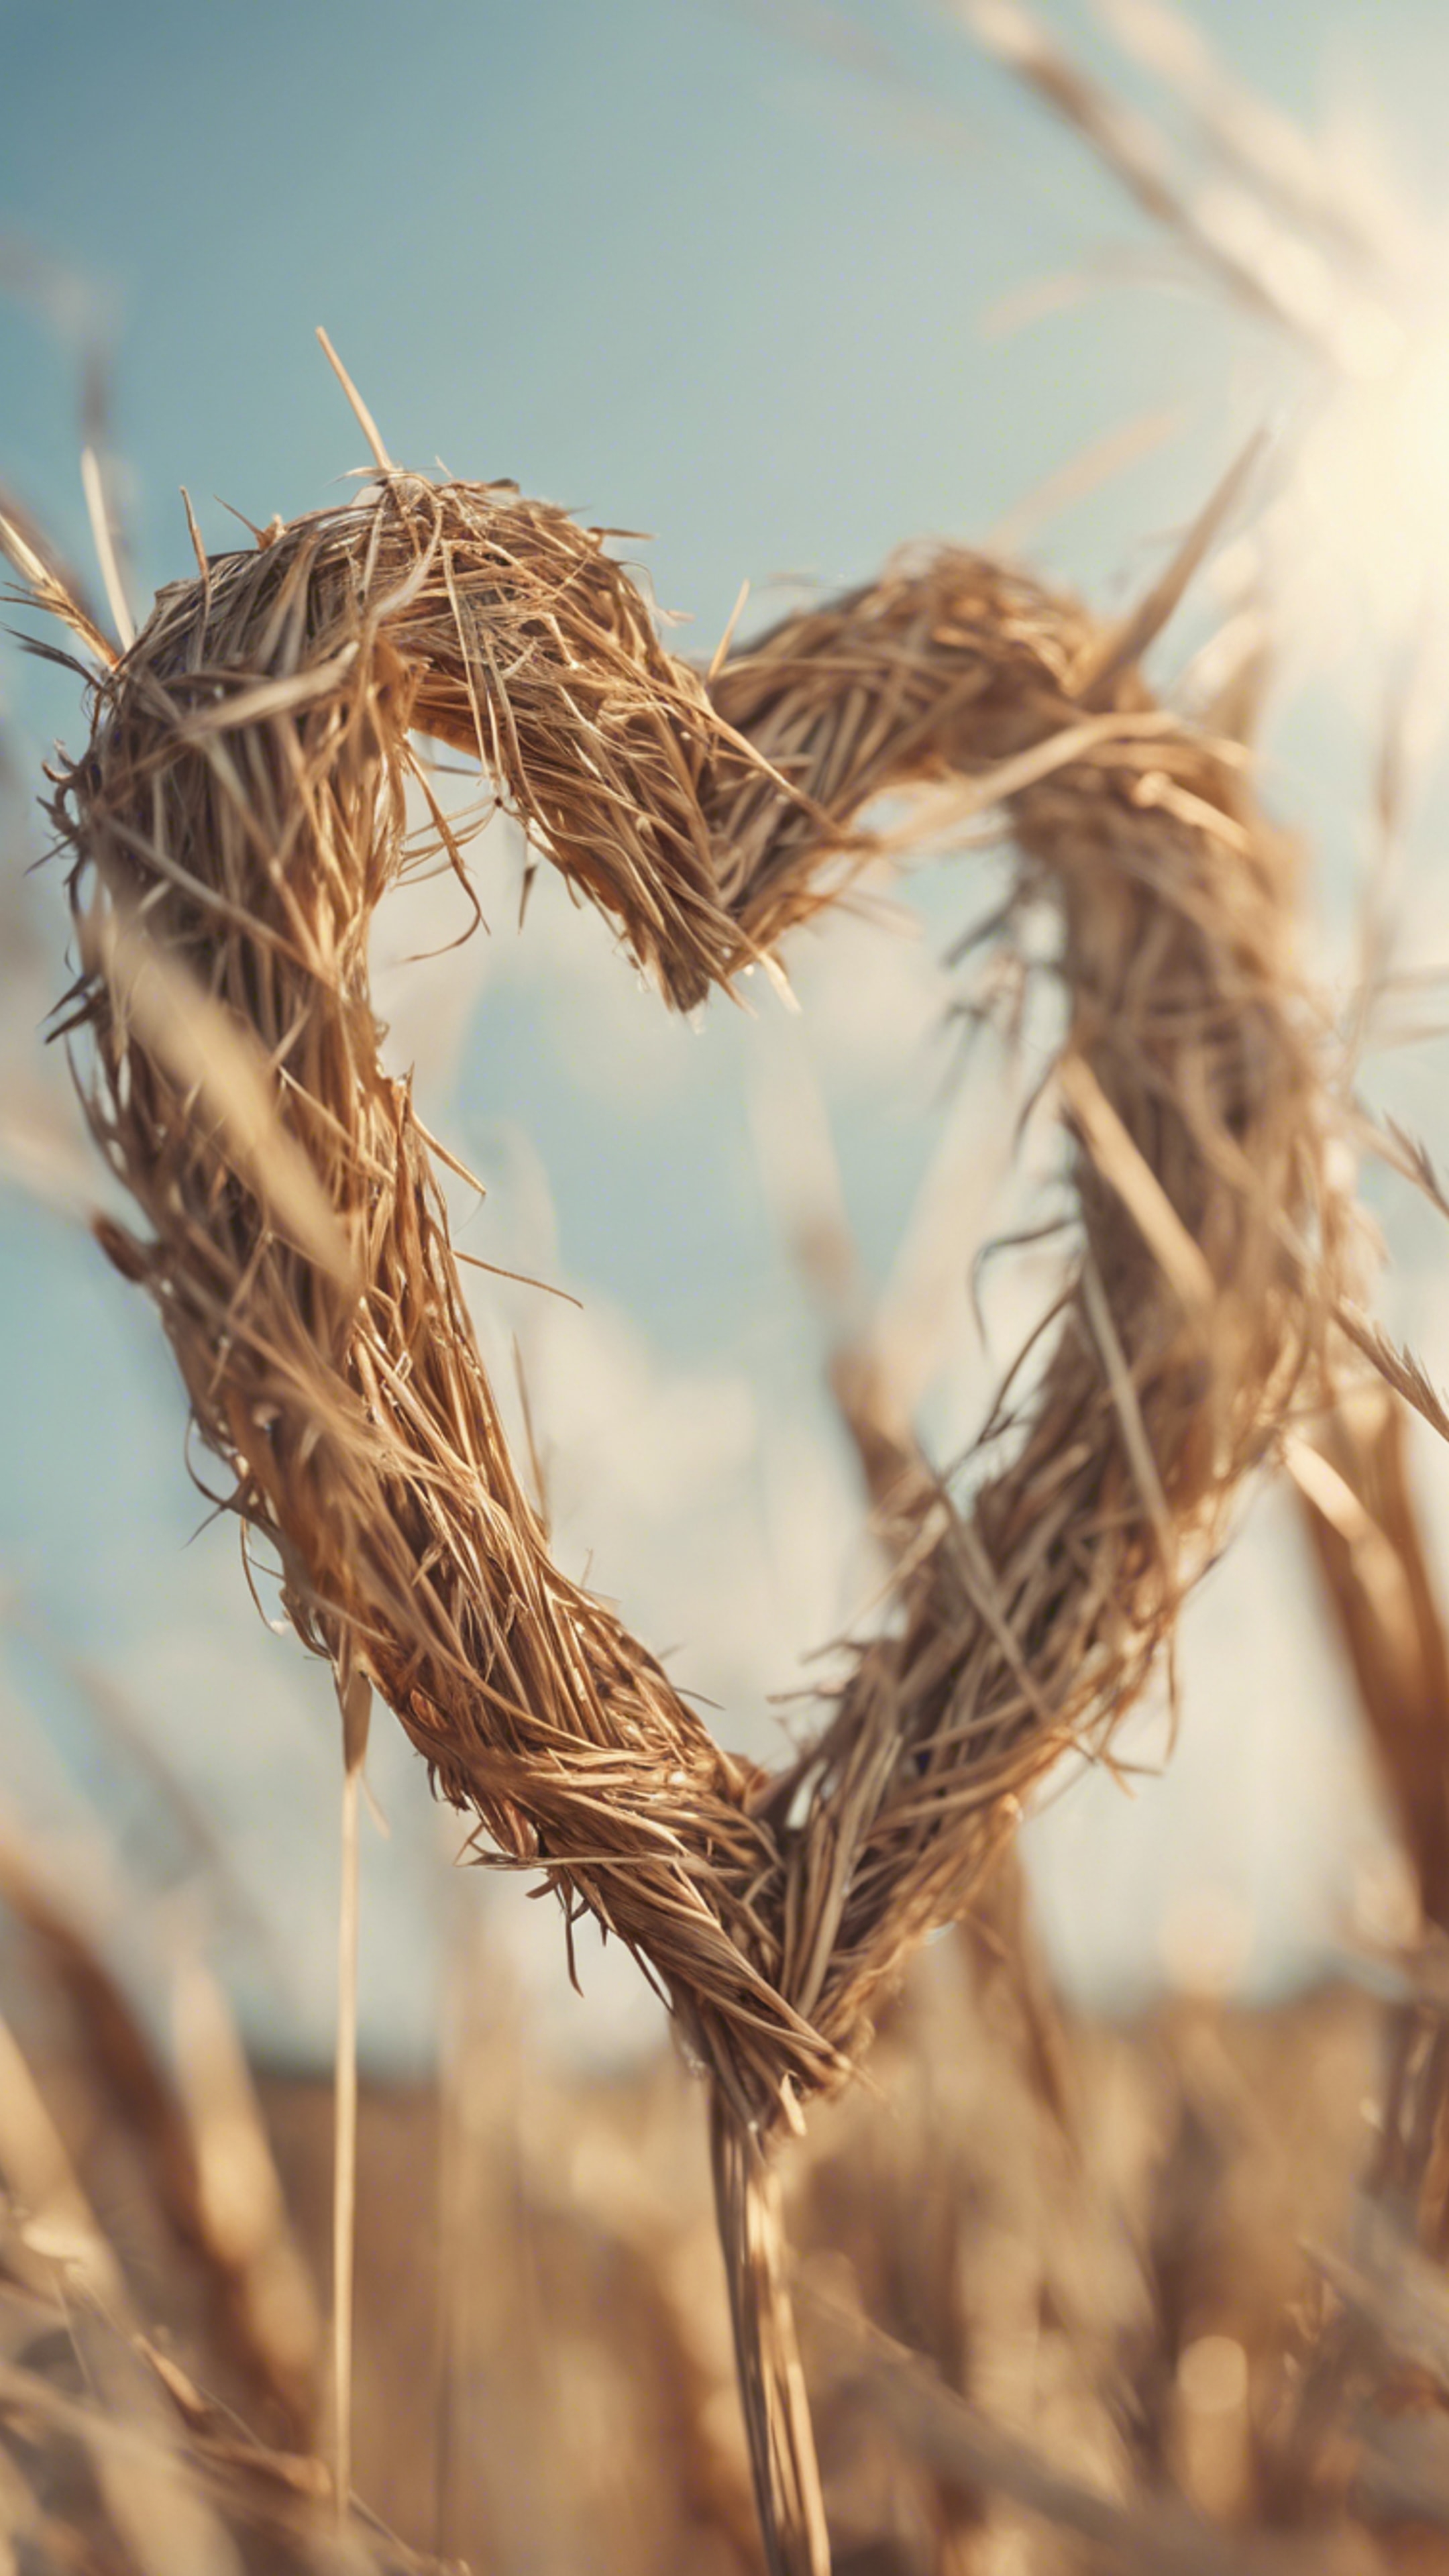 Two intertwined brown straw stems forming a heart shape against a summer sky.壁紙[f0d83a42e18942e891a9]